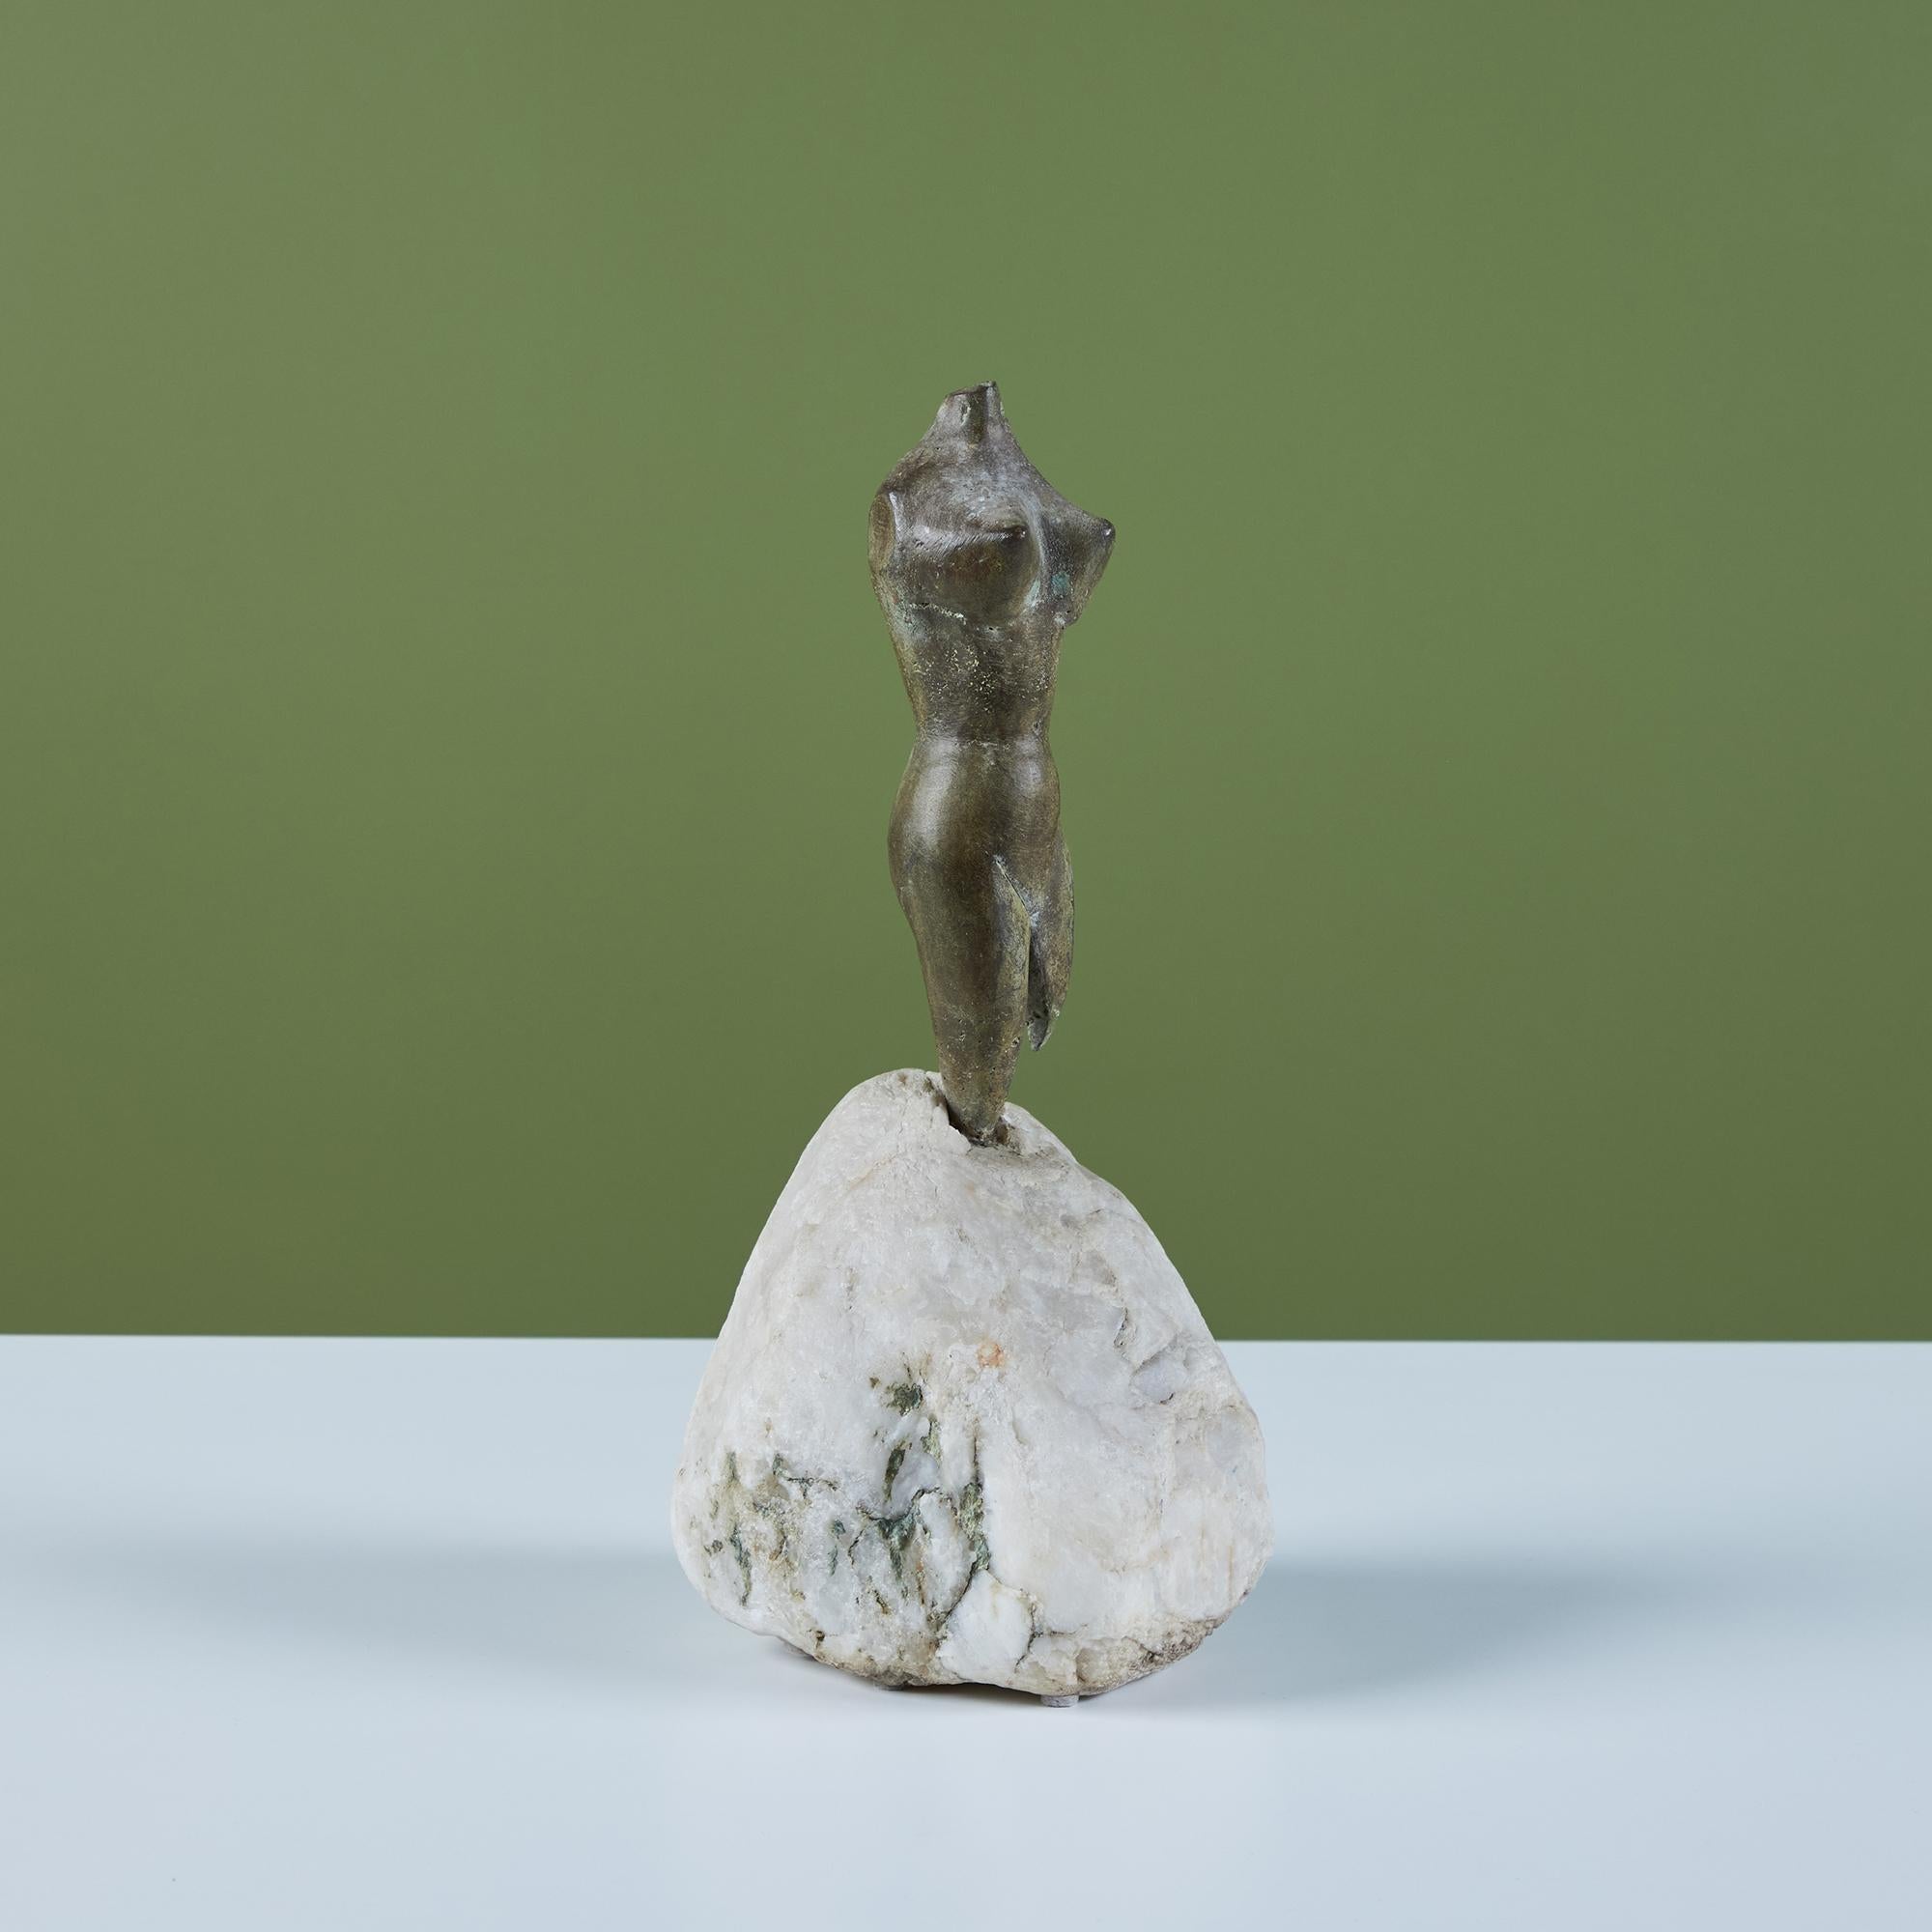 Bronze sculpture of a woman's figure mounted on organic stone base. 
Marked with on the underside side - JJ TIMO.

Dimensions
6.25